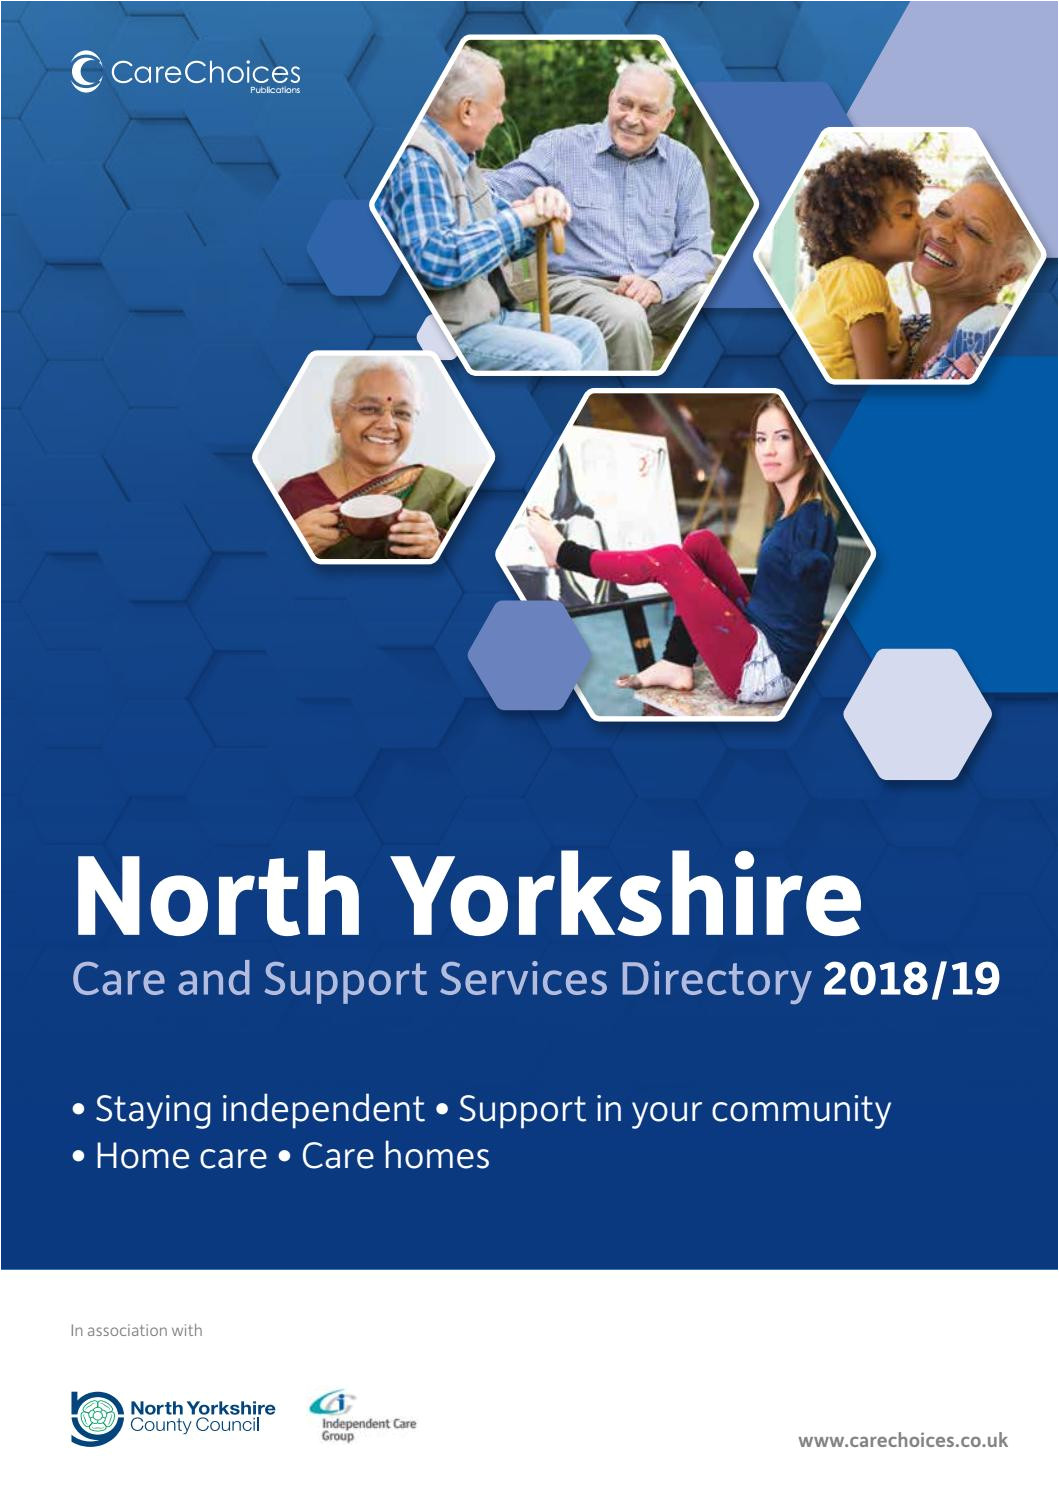 north yorkshire care and support services directory 2018 19 by care choices ltd issuu